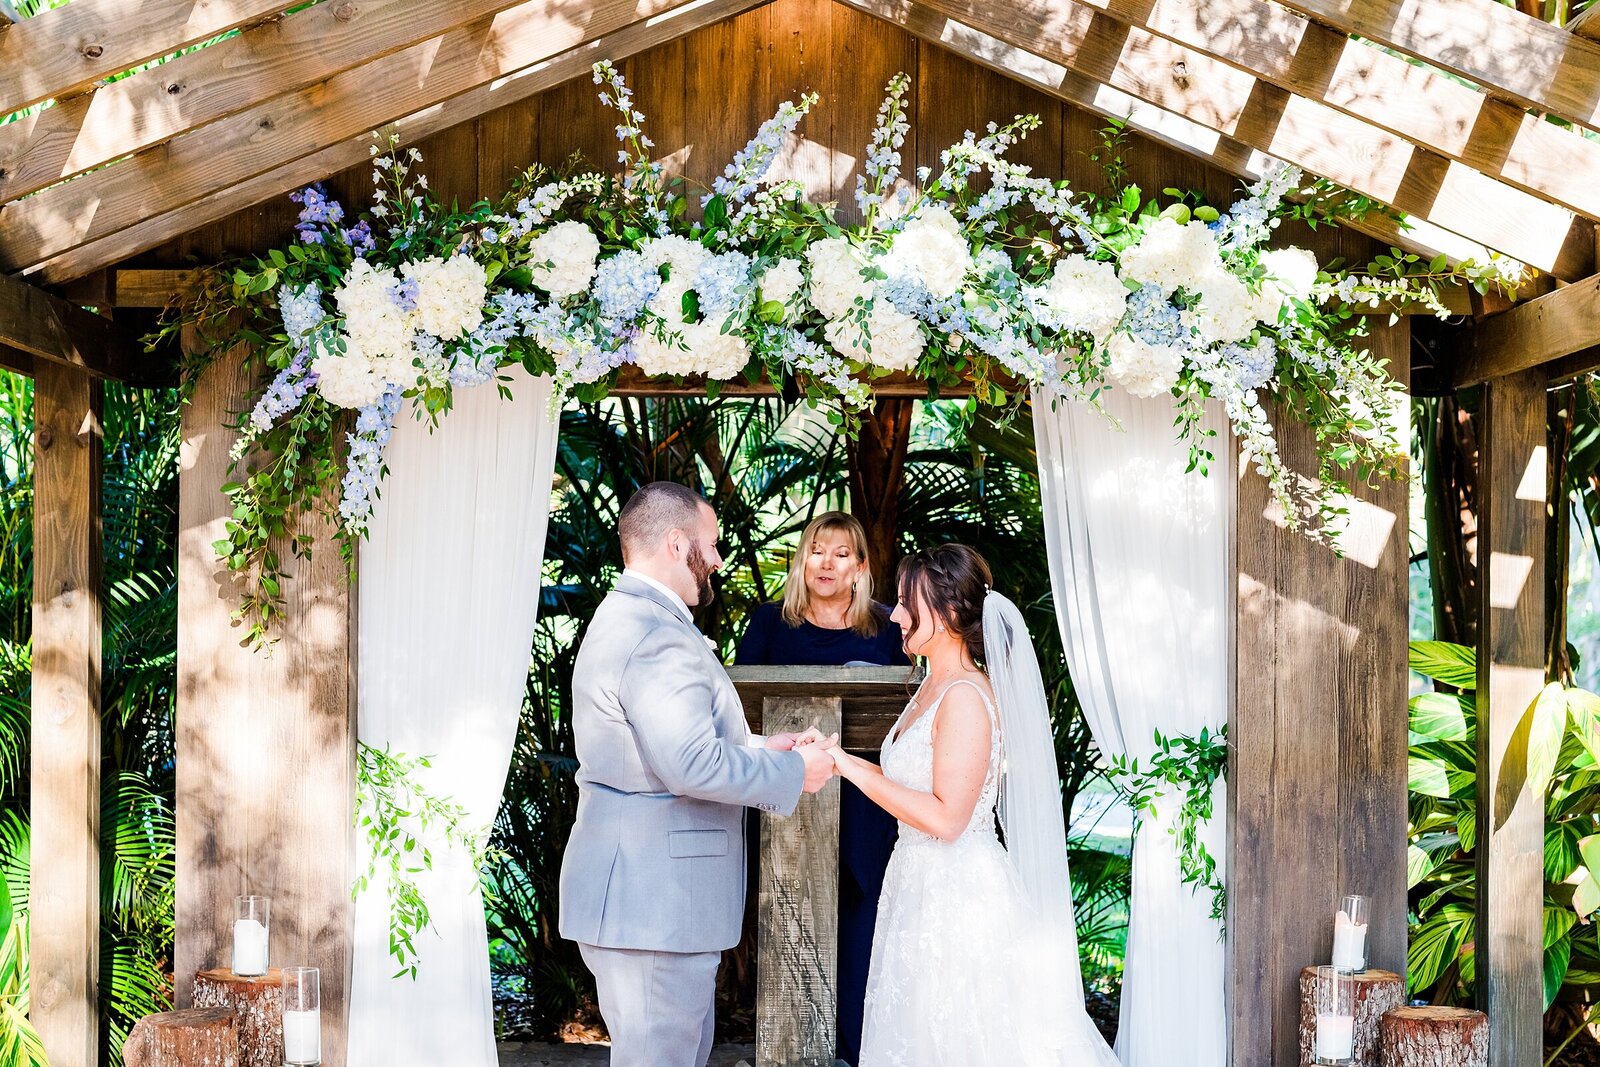 Wedding Ceremony Inspiration | The Delamater House Wedding | Chynna Pacheco Photography-514